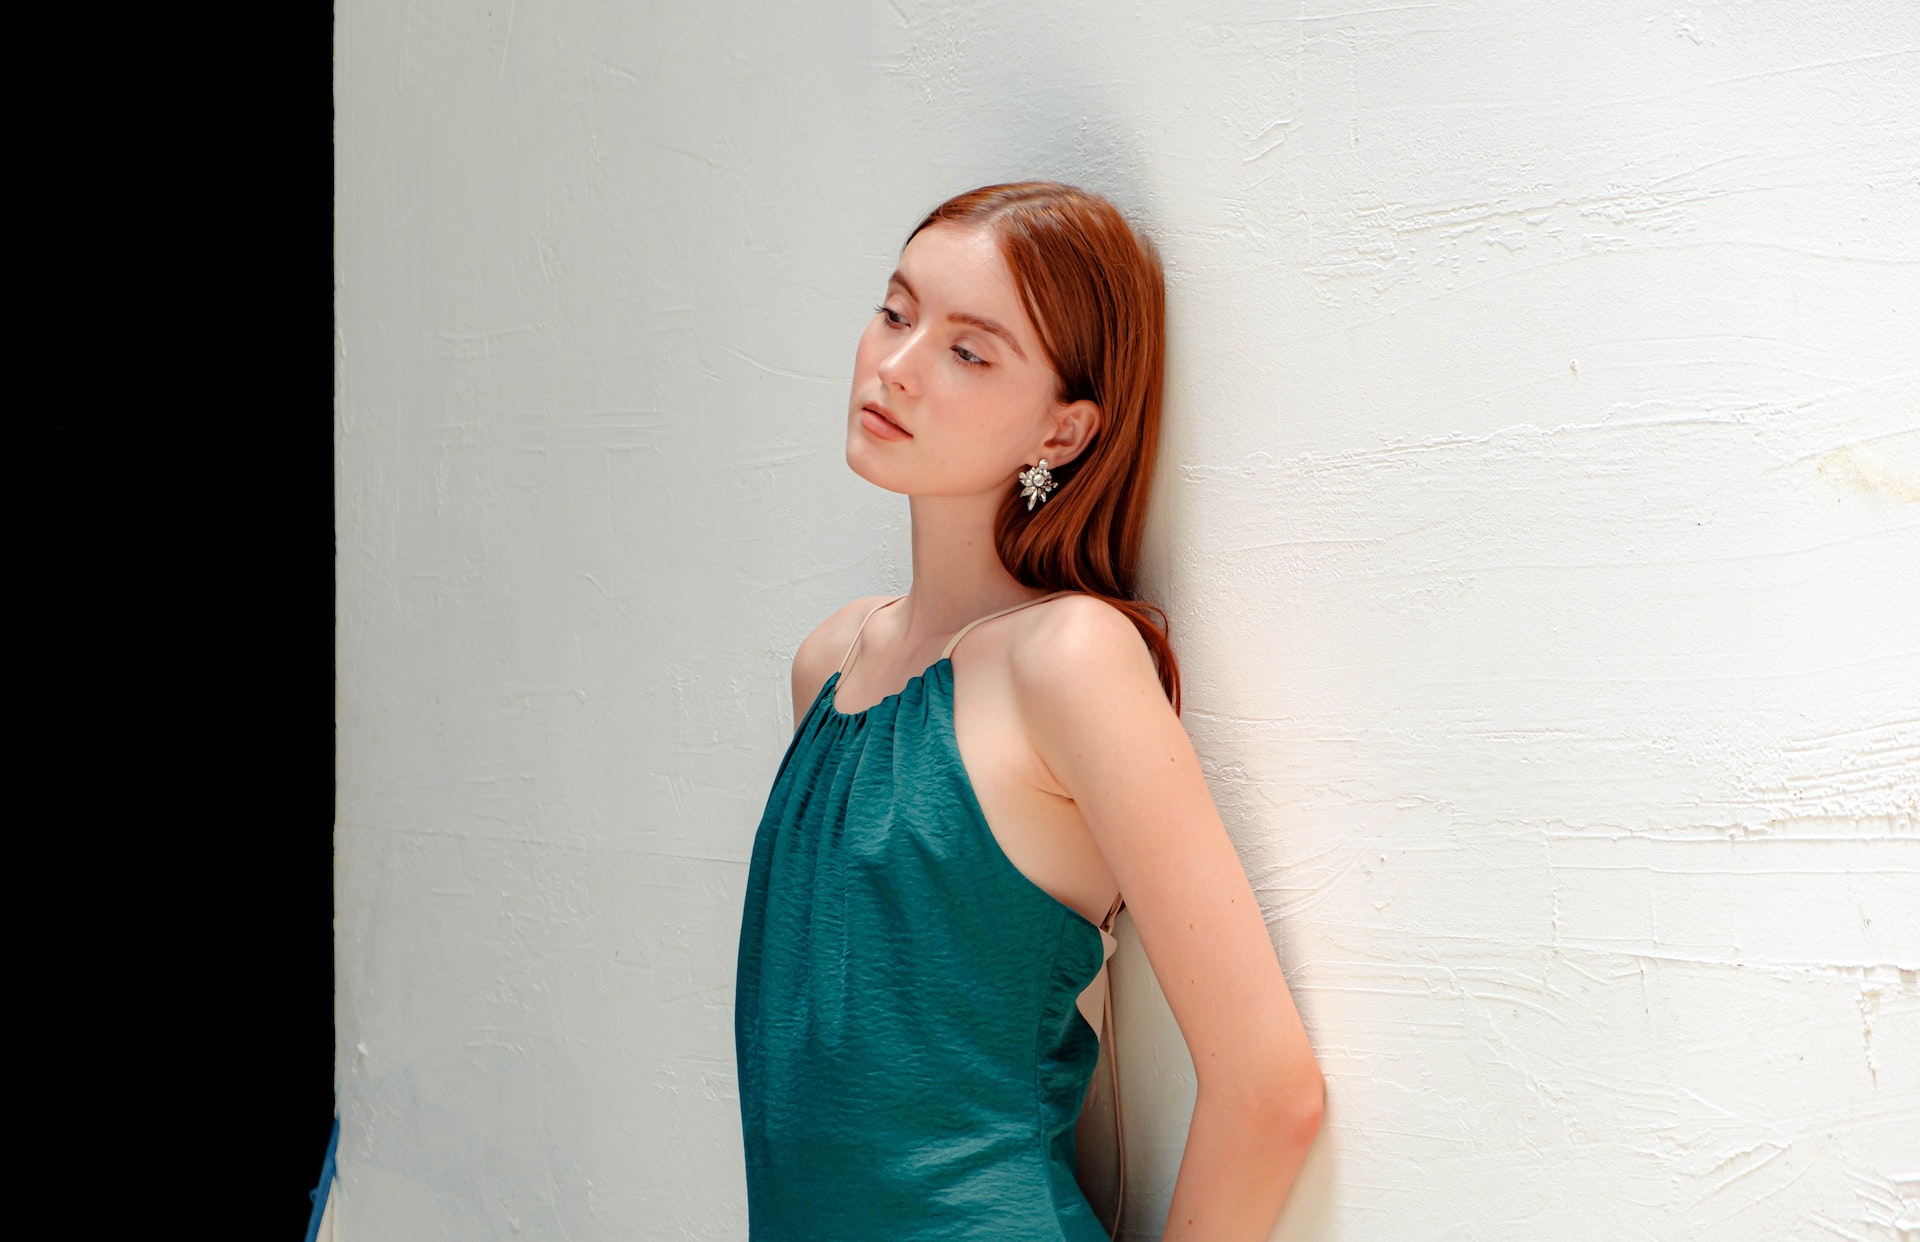 Girl with red hair in a green dress leaning against a wall